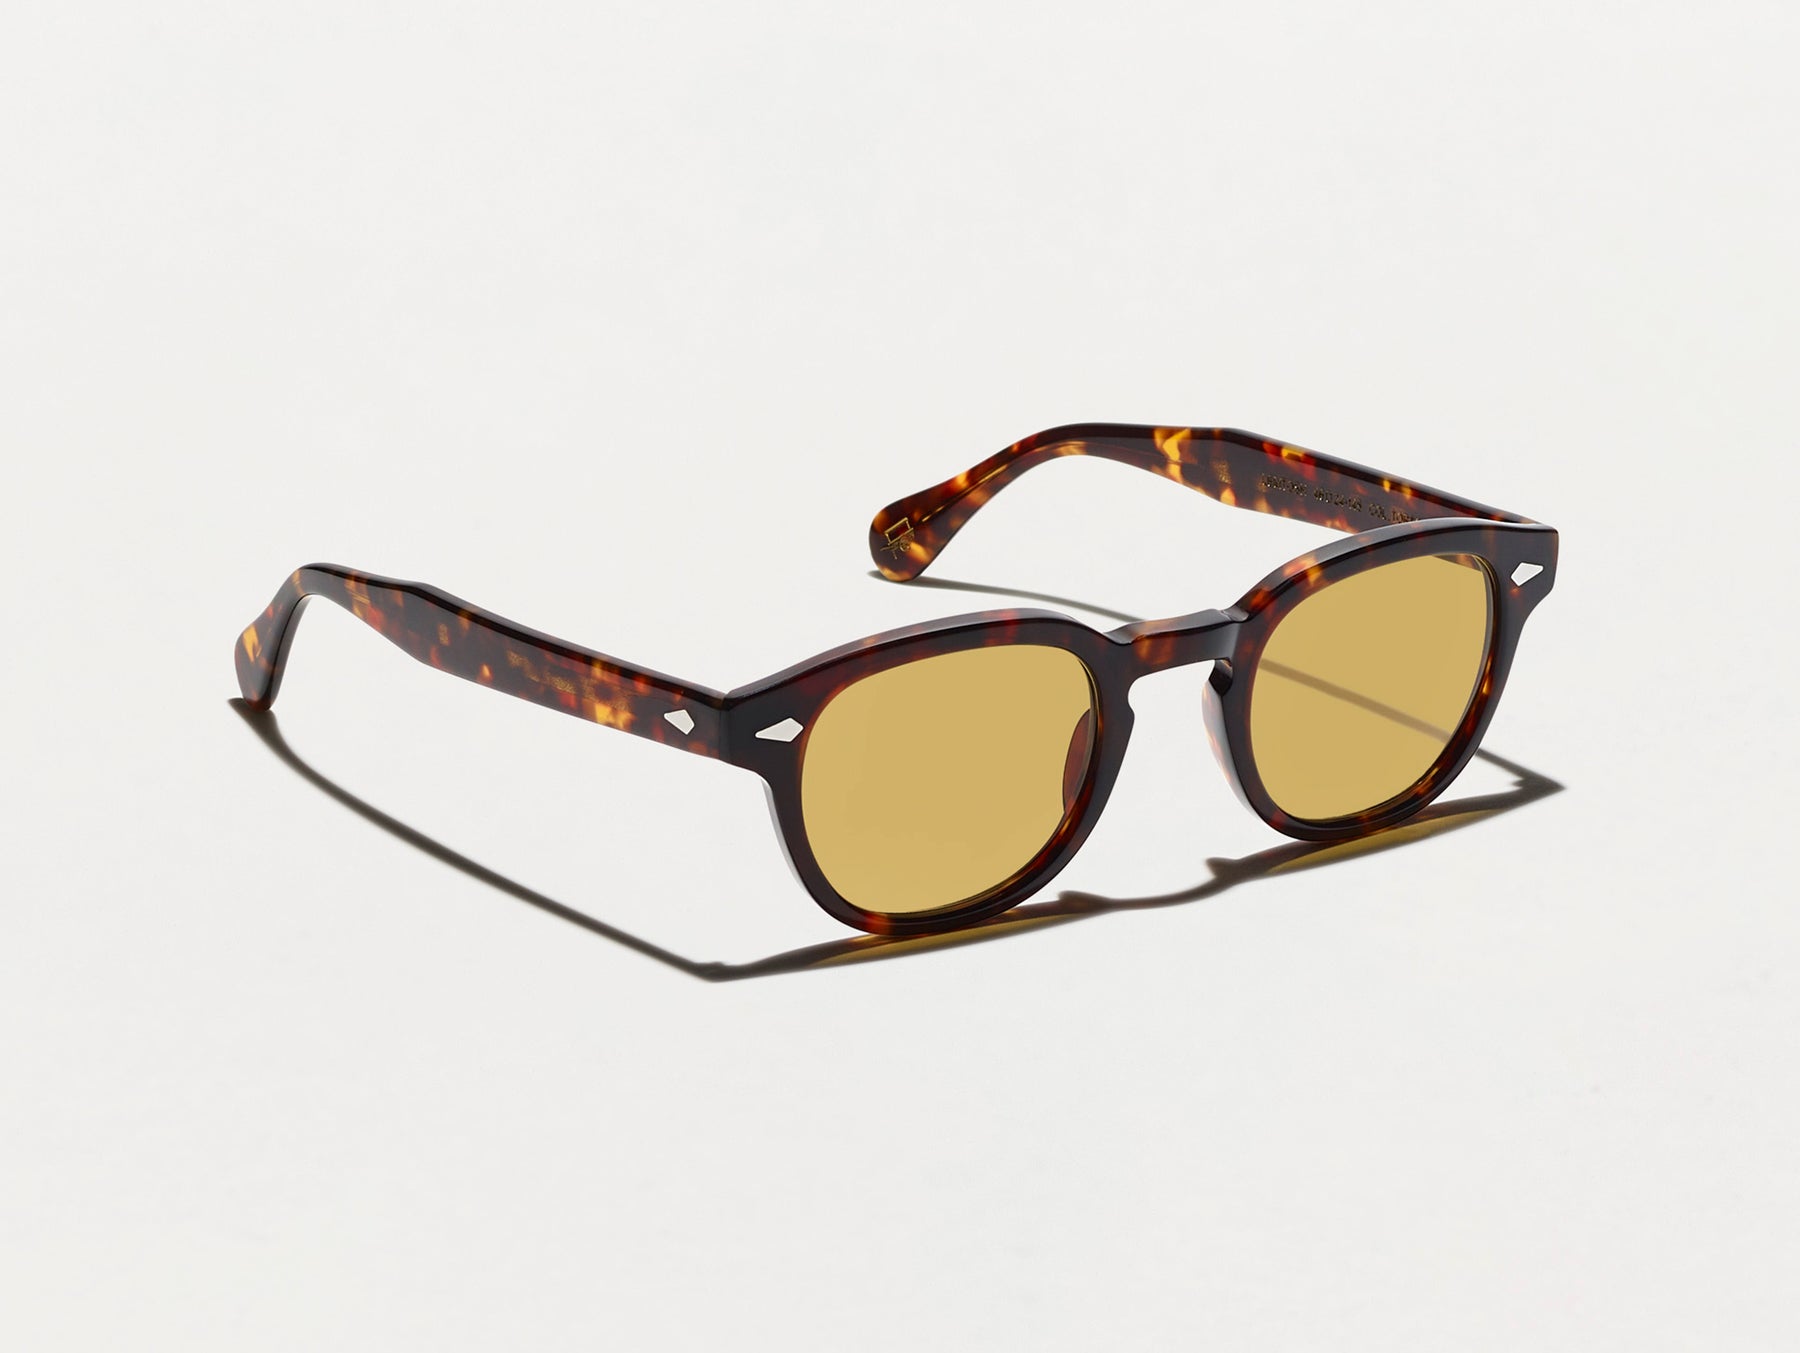 The LEMTOSH Tortoise with Amber Tinted Lenses